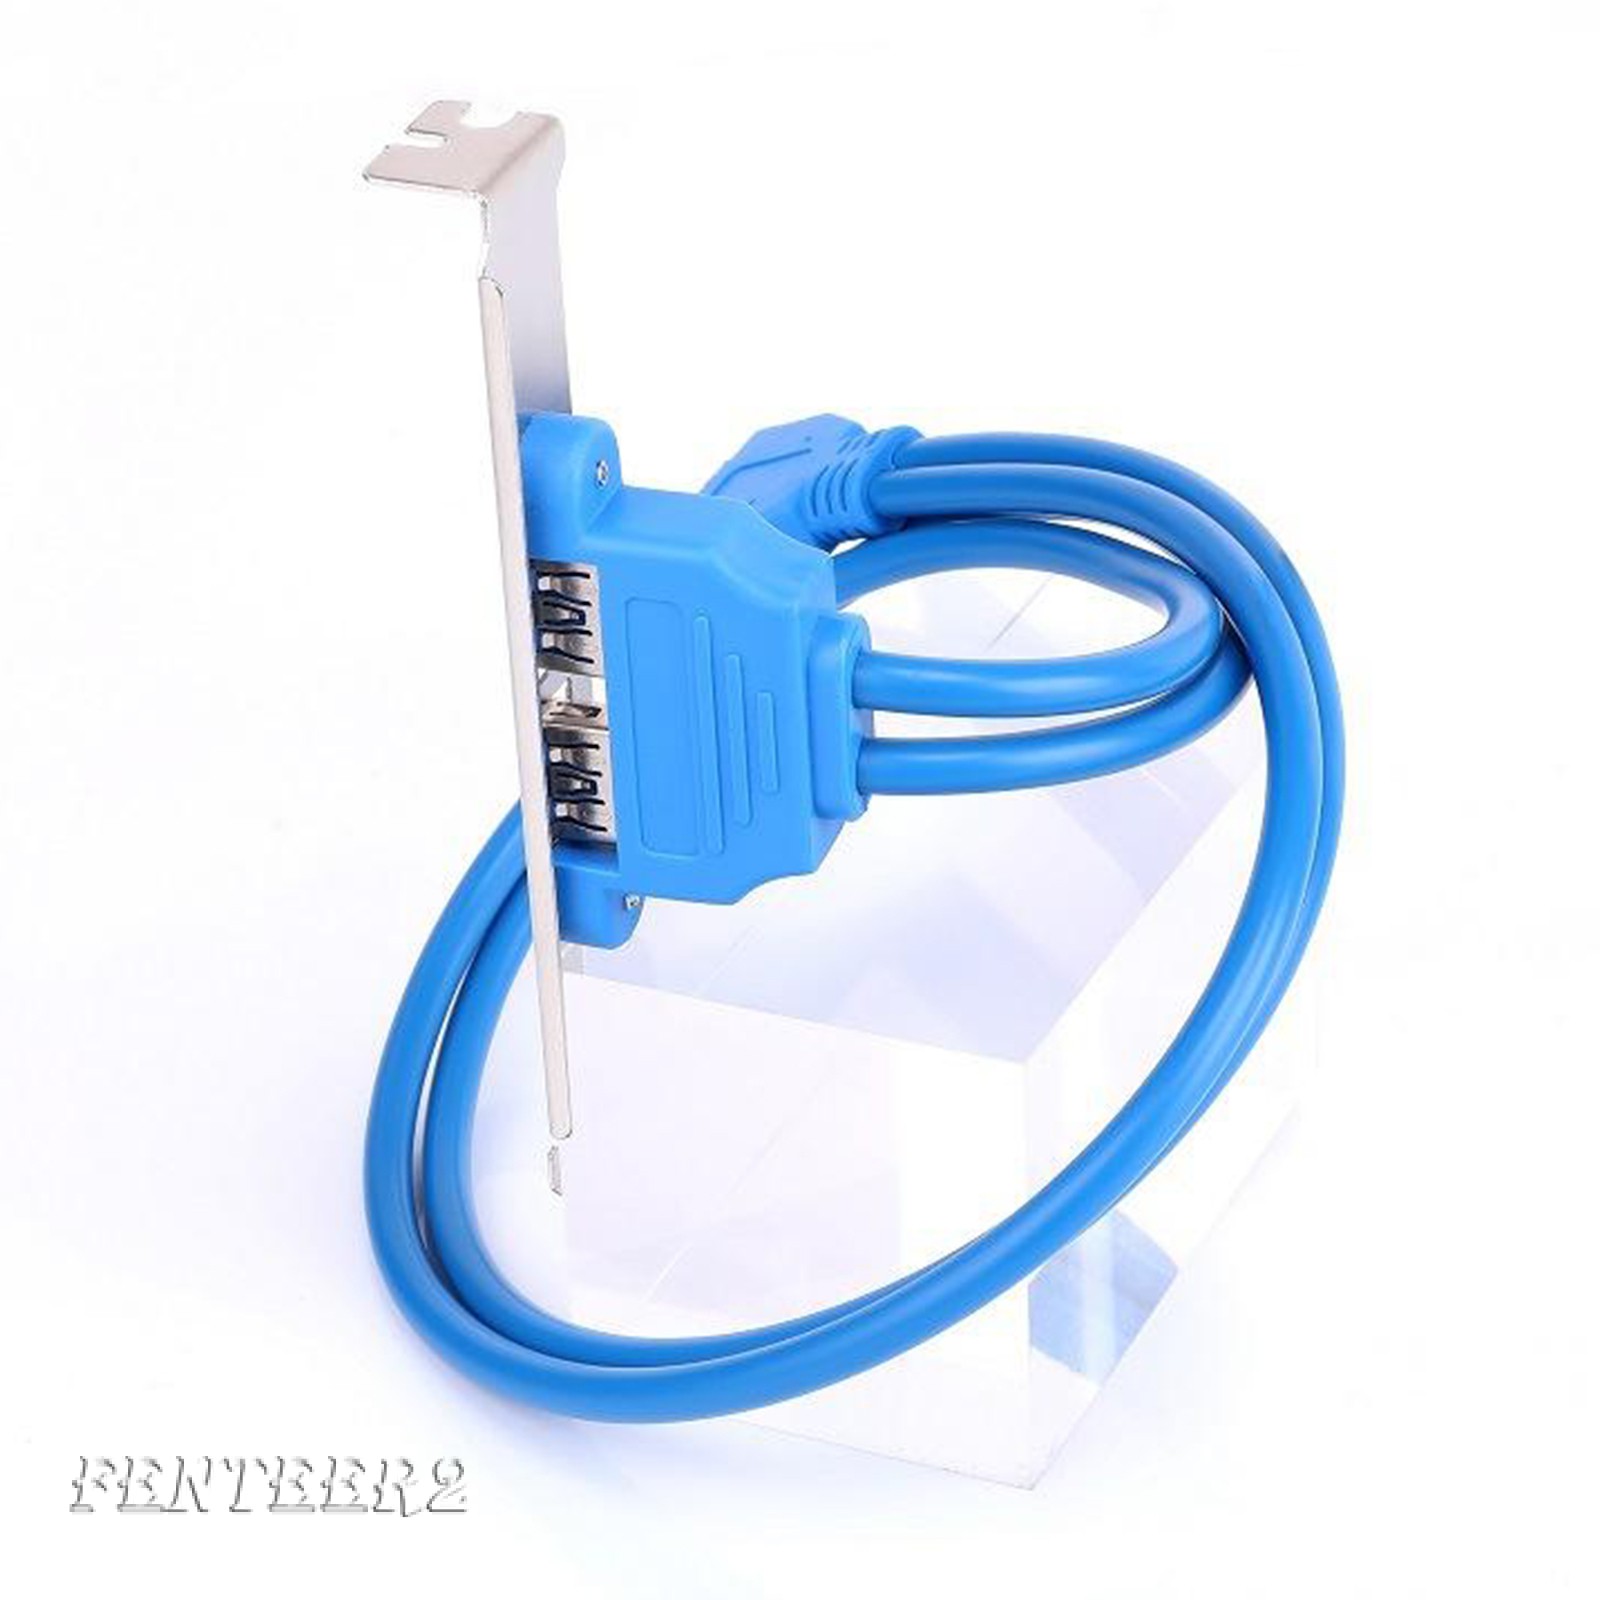 (Fenteer2 3c) Dual 2 Ports Usb 3.0 Back Panel To 20pin Header Cable With Bracket